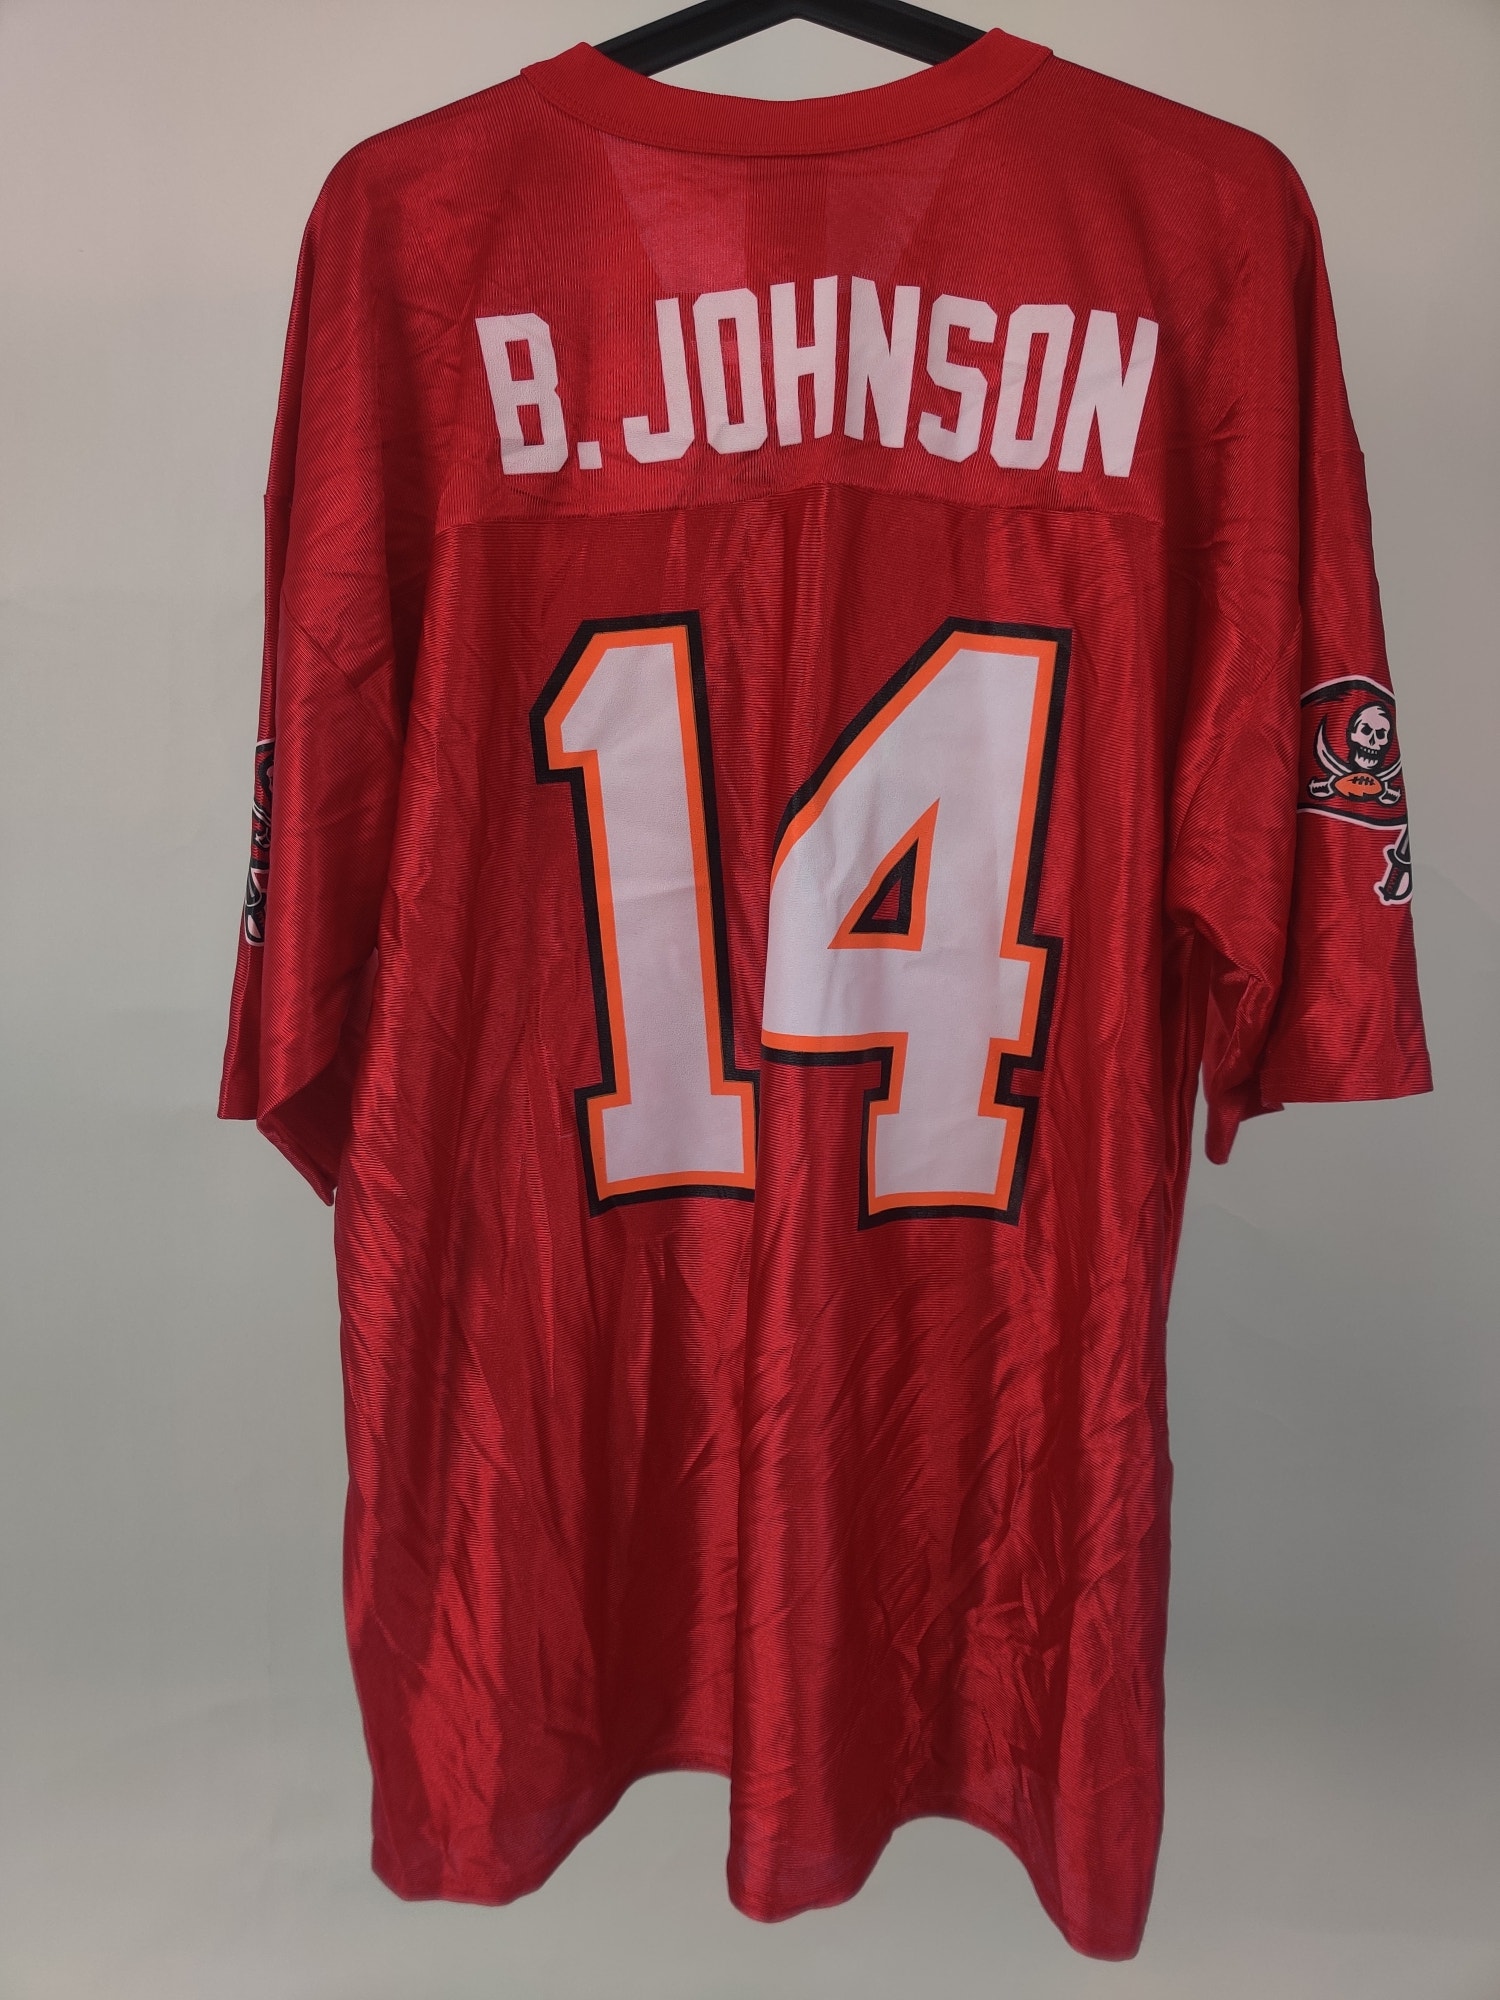 (V)NEW Tampa Bay Buccaneers B. Johnson #14 NFL Jersey Men’s XL - Picture 5 of 9